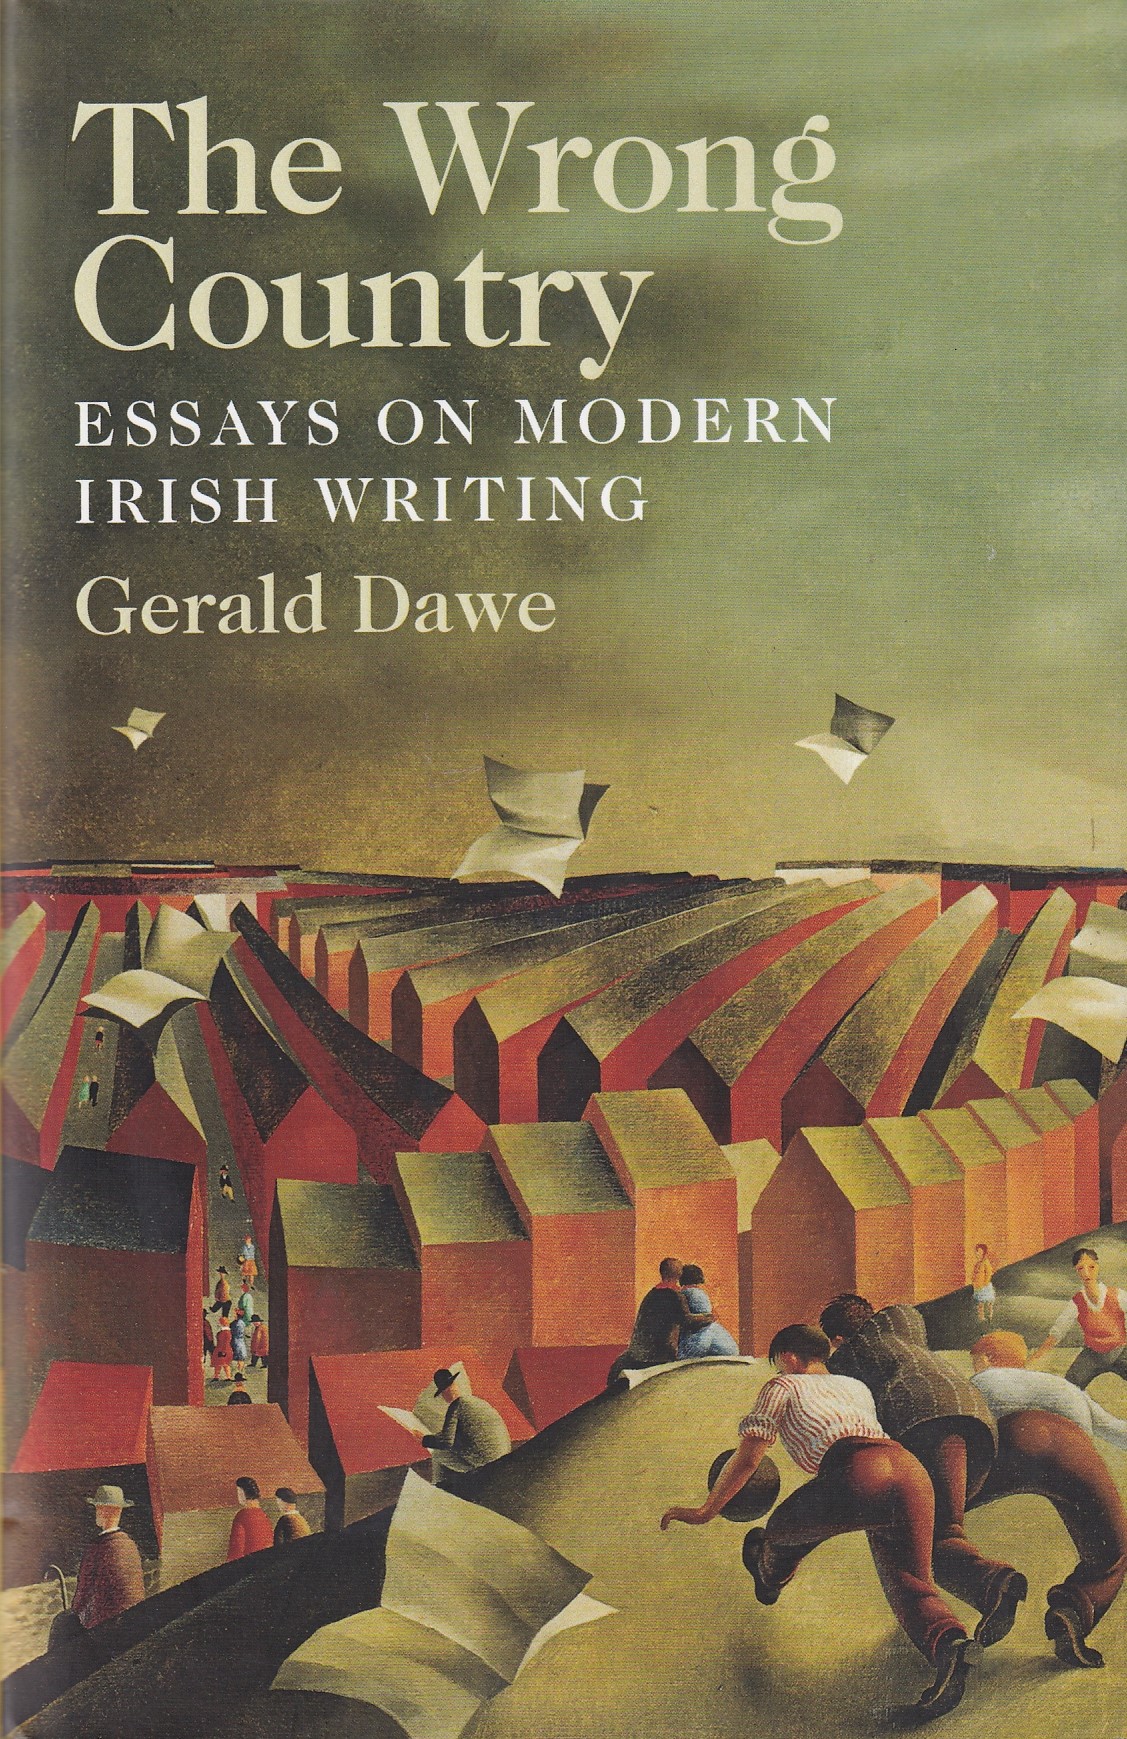 The Wrong Country: Essays on Modern Irish Writing by Gerald Dawe